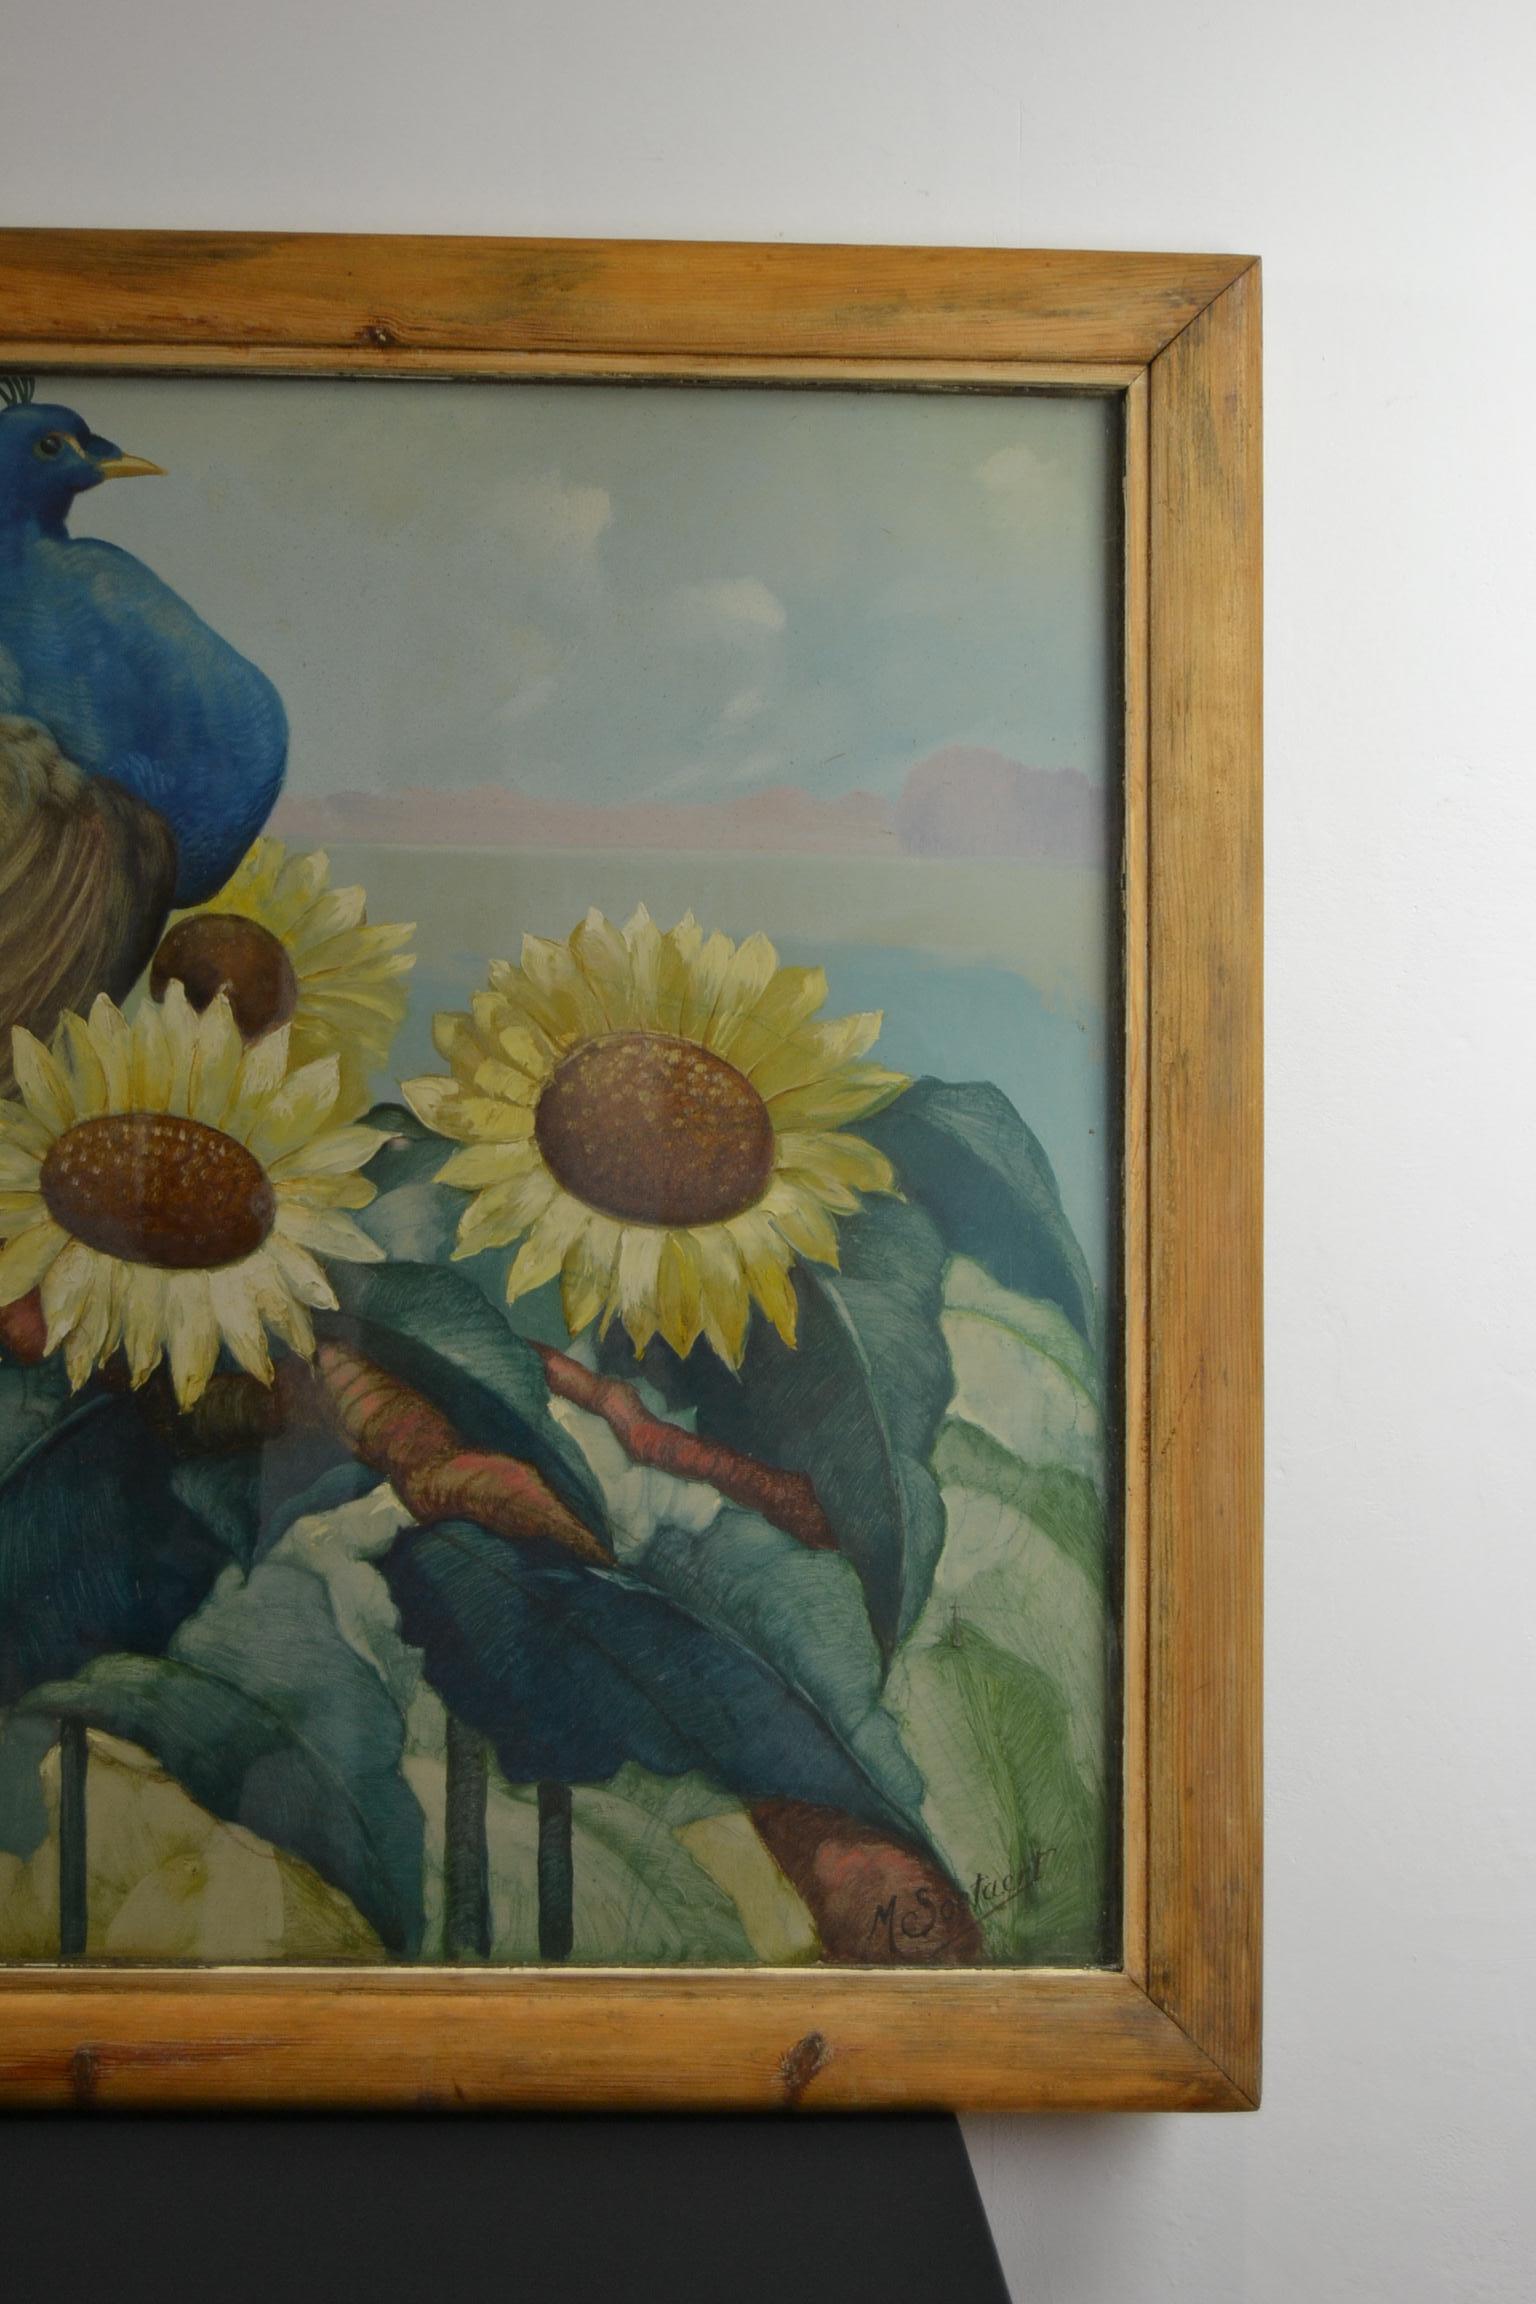 XL Framed Painting Peacock and Sunflowers by M.Soetaert For Sale 3